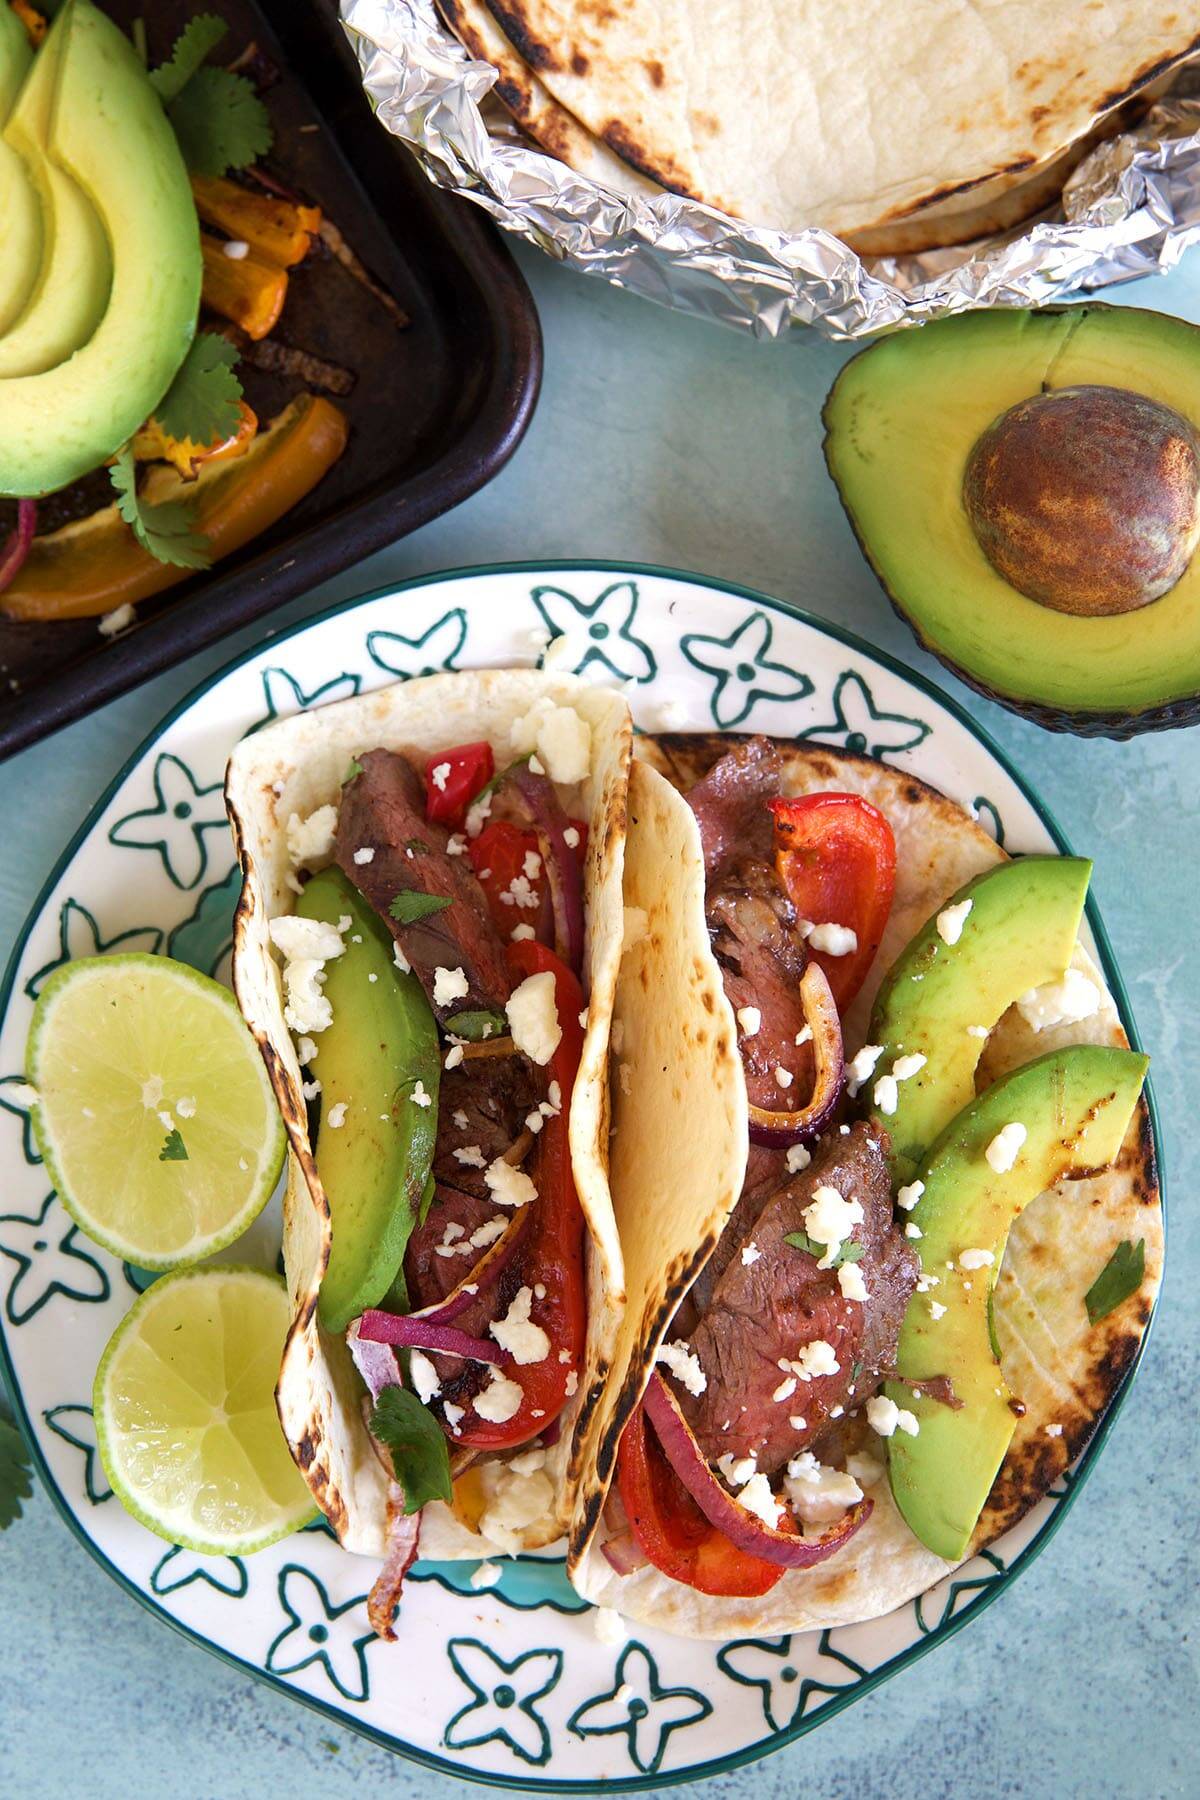 two steak fajitas on a plate on a white background with an avocado in the corner.